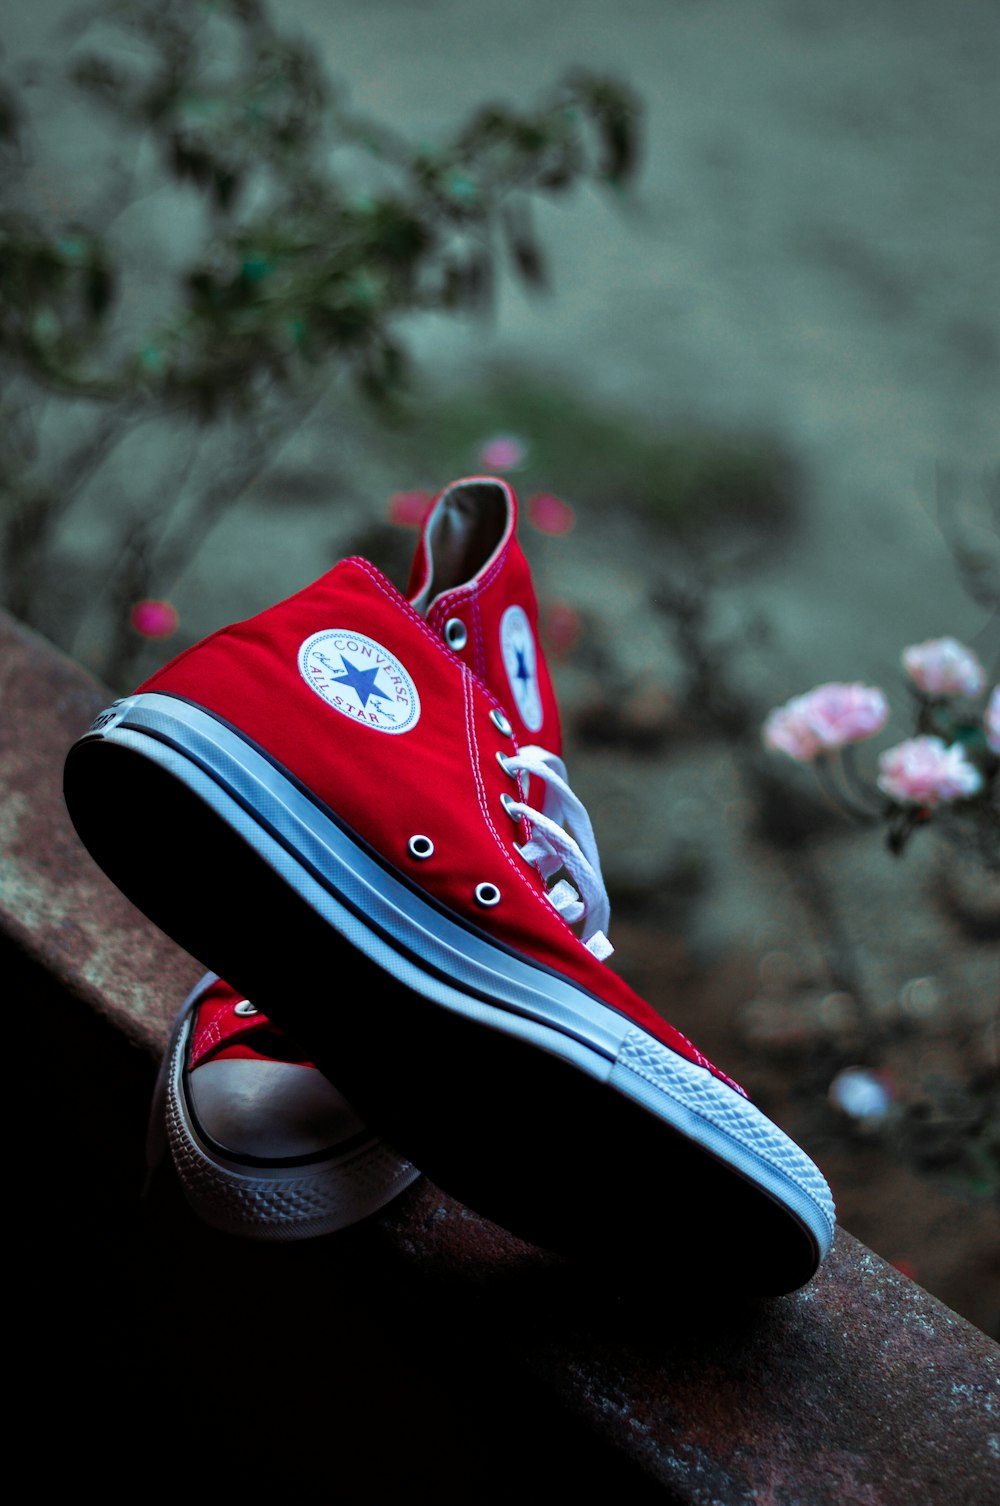 and converse all star high top sneakers photo – Free Moody Image on Unsplash